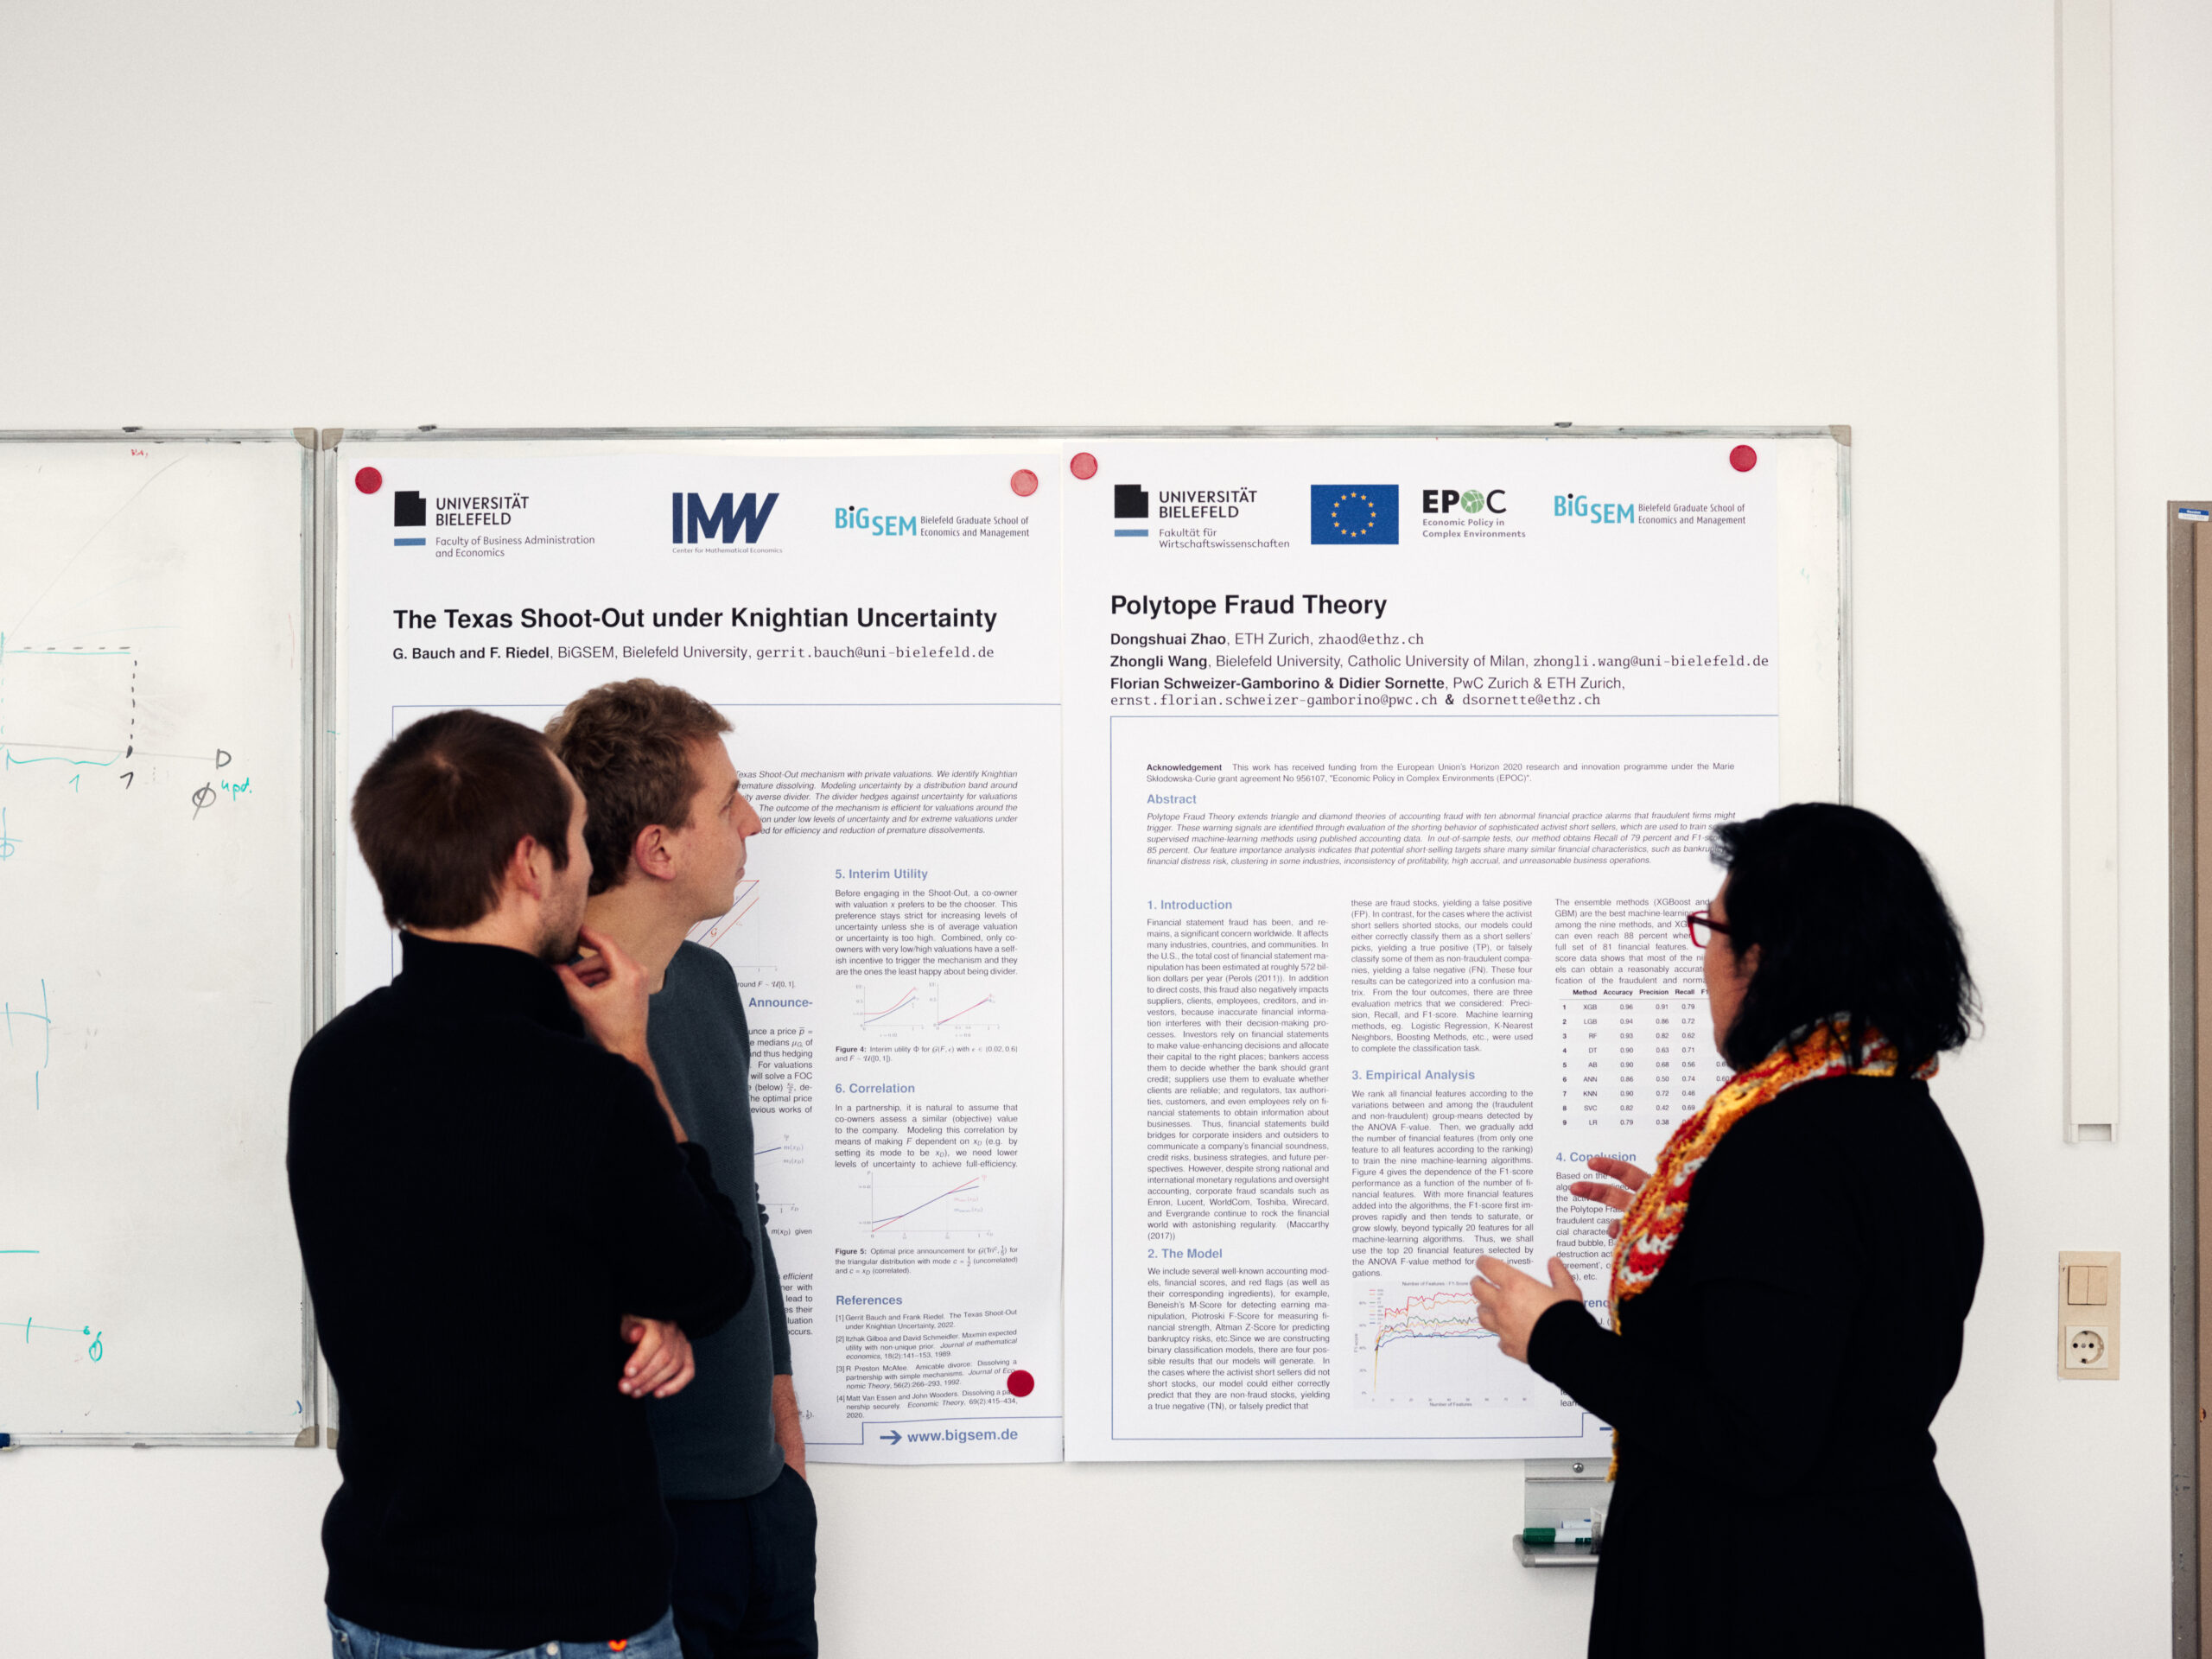 Photo with PhD students discussing next to poster